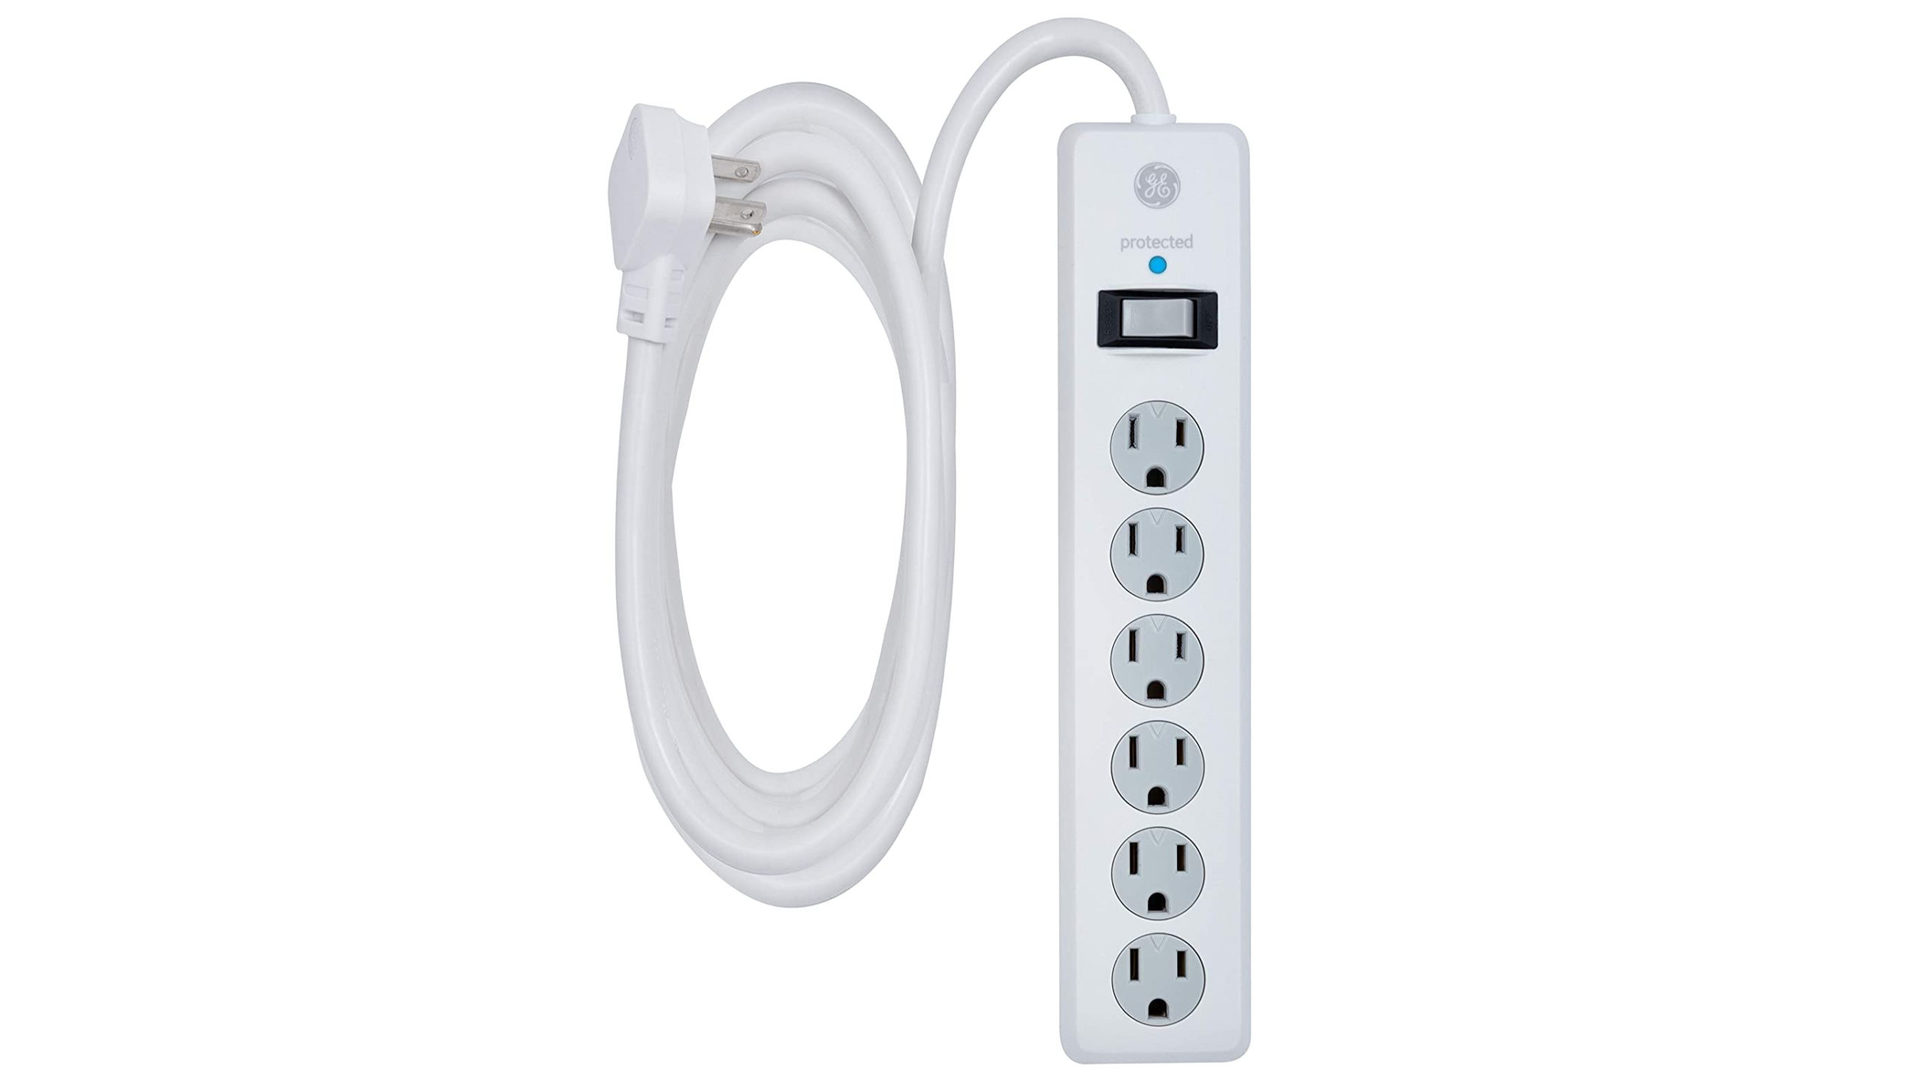 GE 6 Outlet Surge Protector